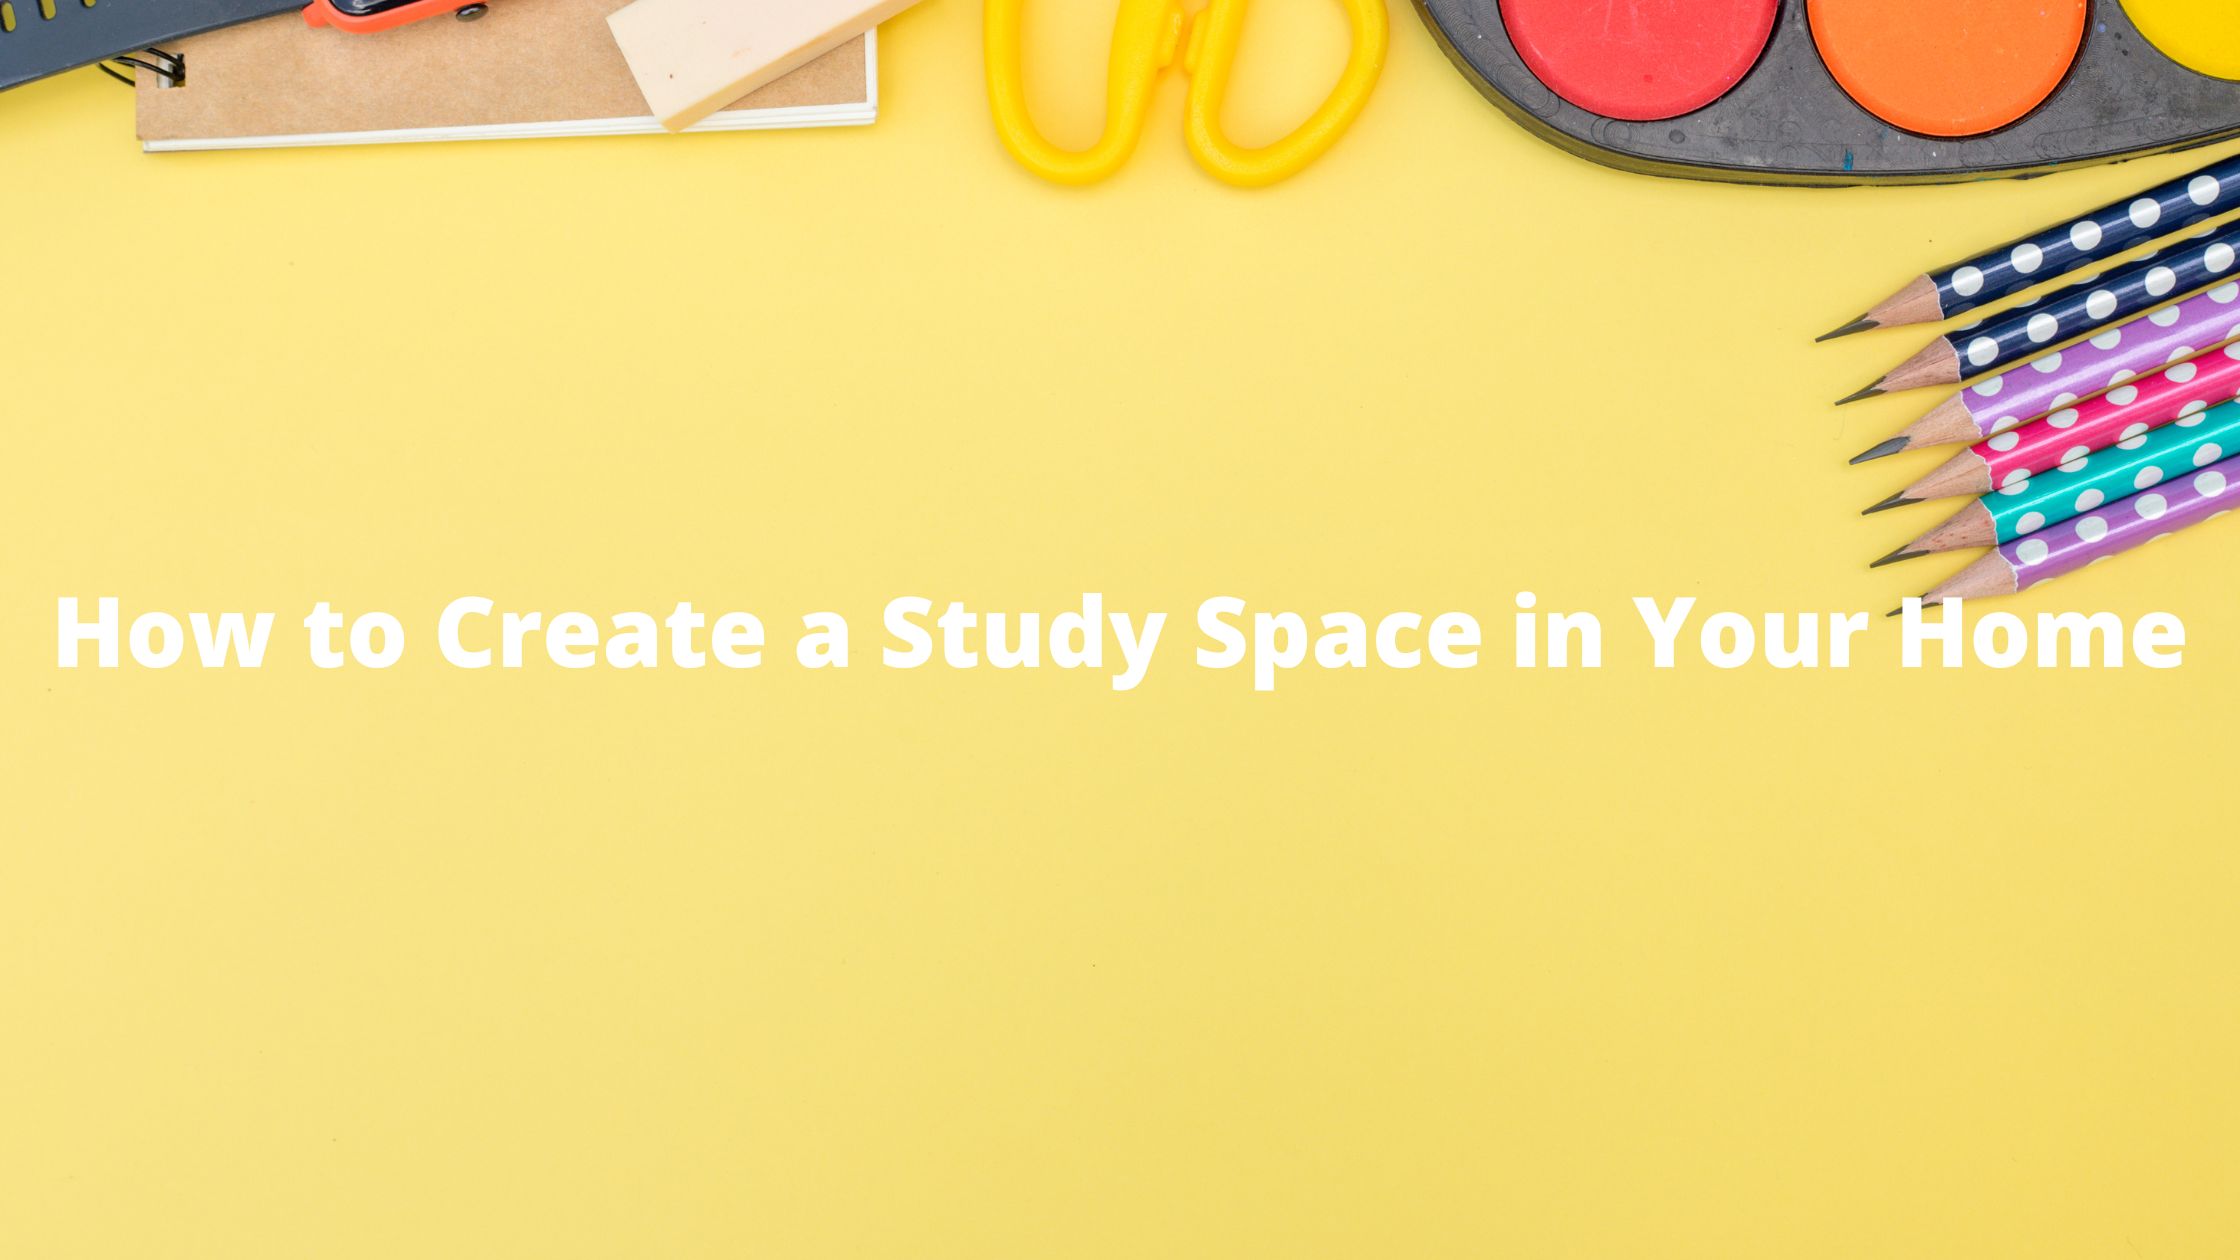 https://雷竞技下载链接官网appwww.explorizers.com/wp-content/uploads/2022/08/How-to-Create-a-Study-Space-in-Your-Home.jpg